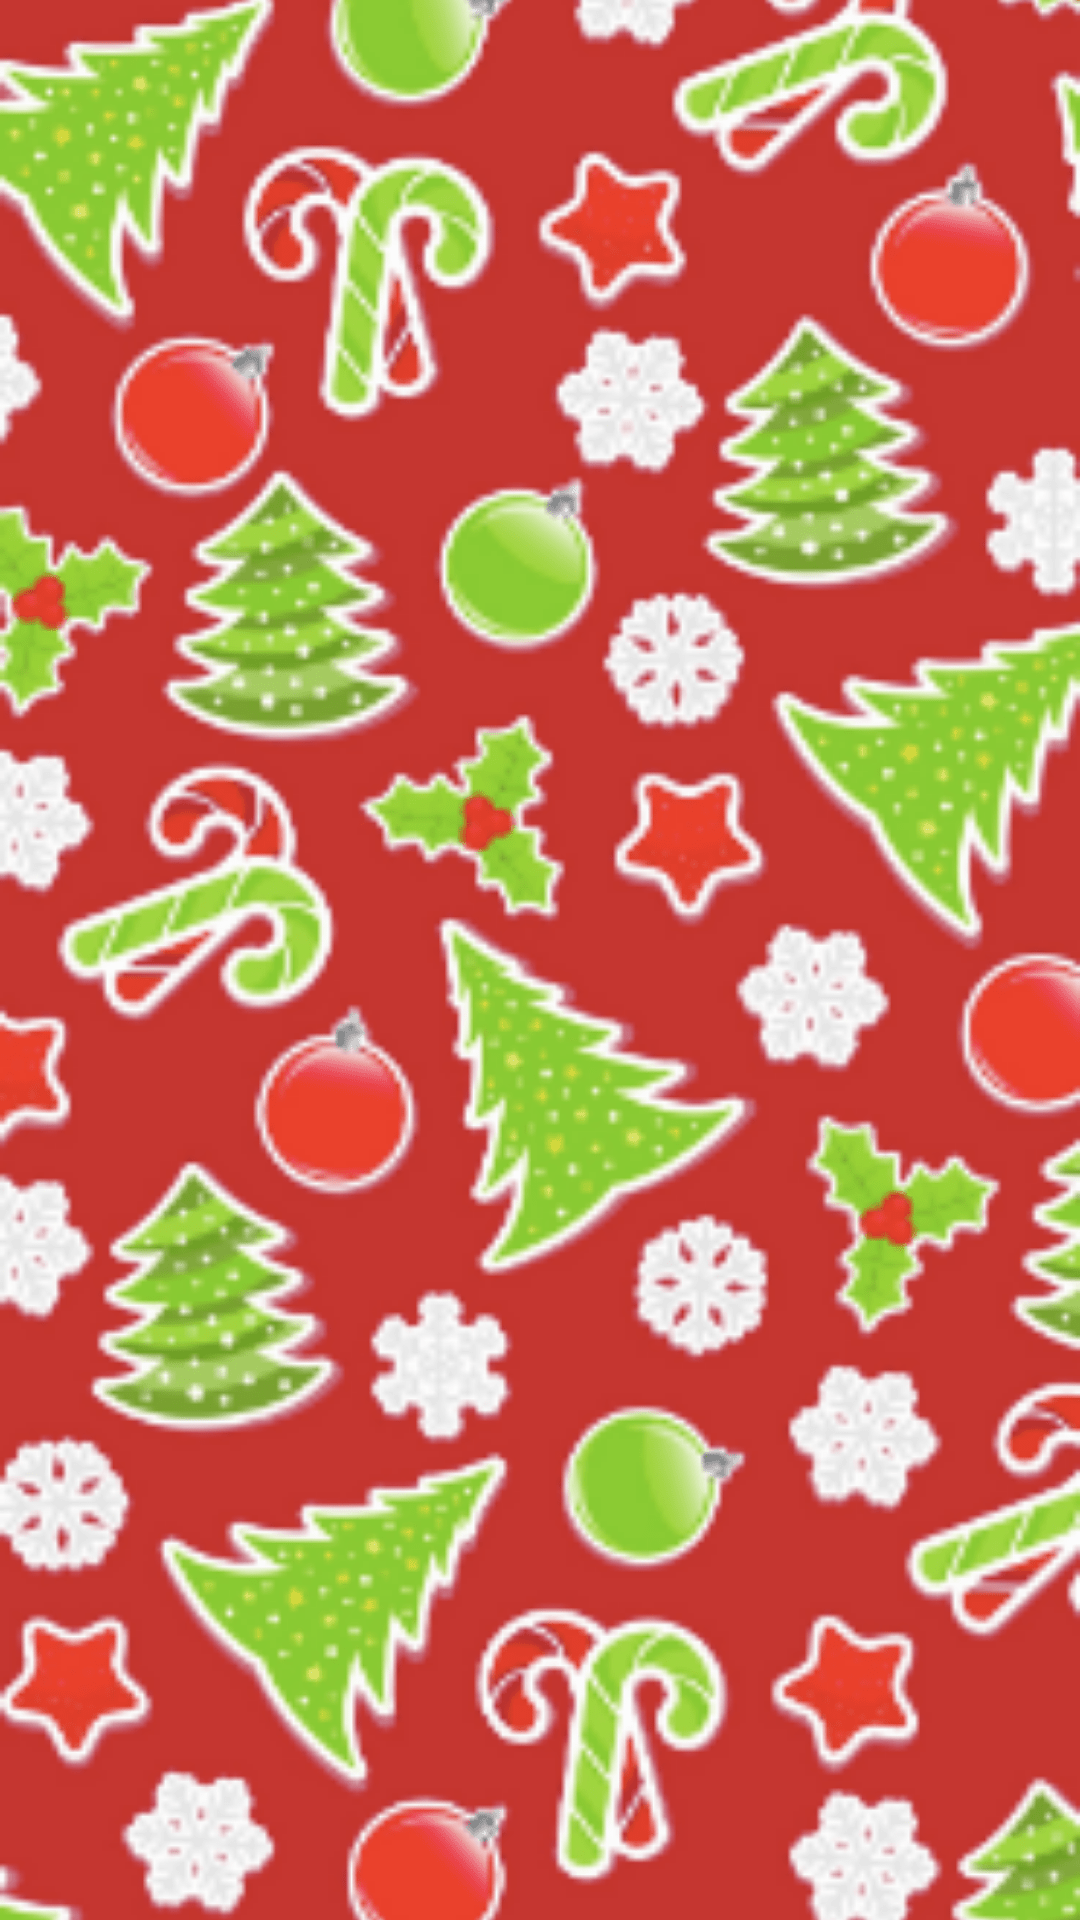 A christmas pattern with candy canes and other decorations - Christmas